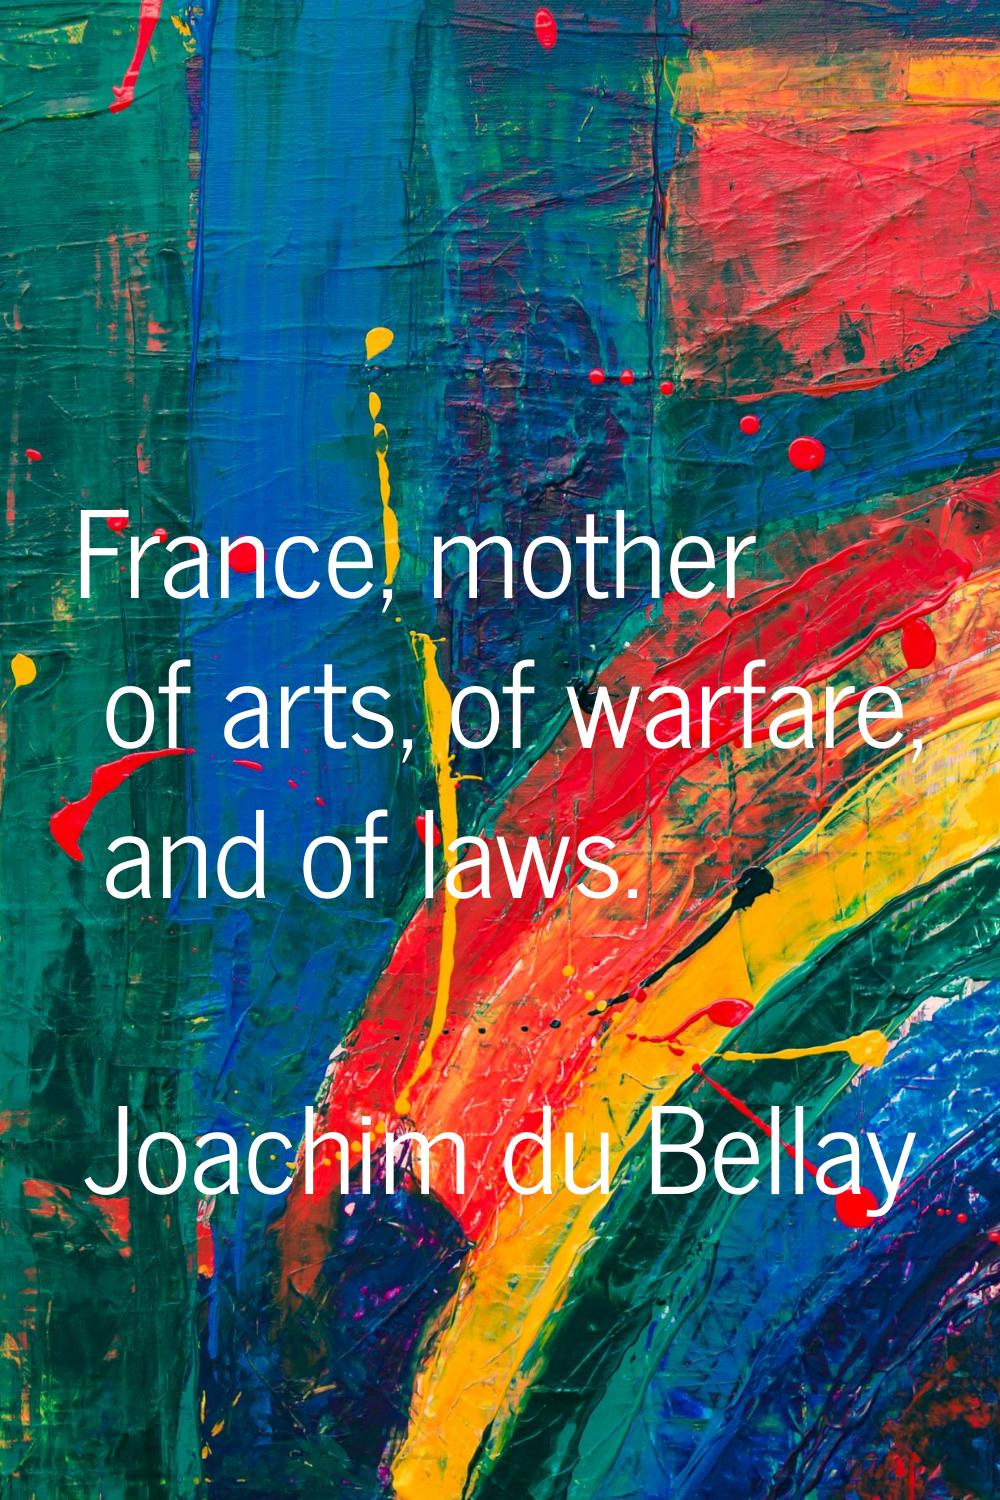 France, mother of arts, of warfare, and of laws.